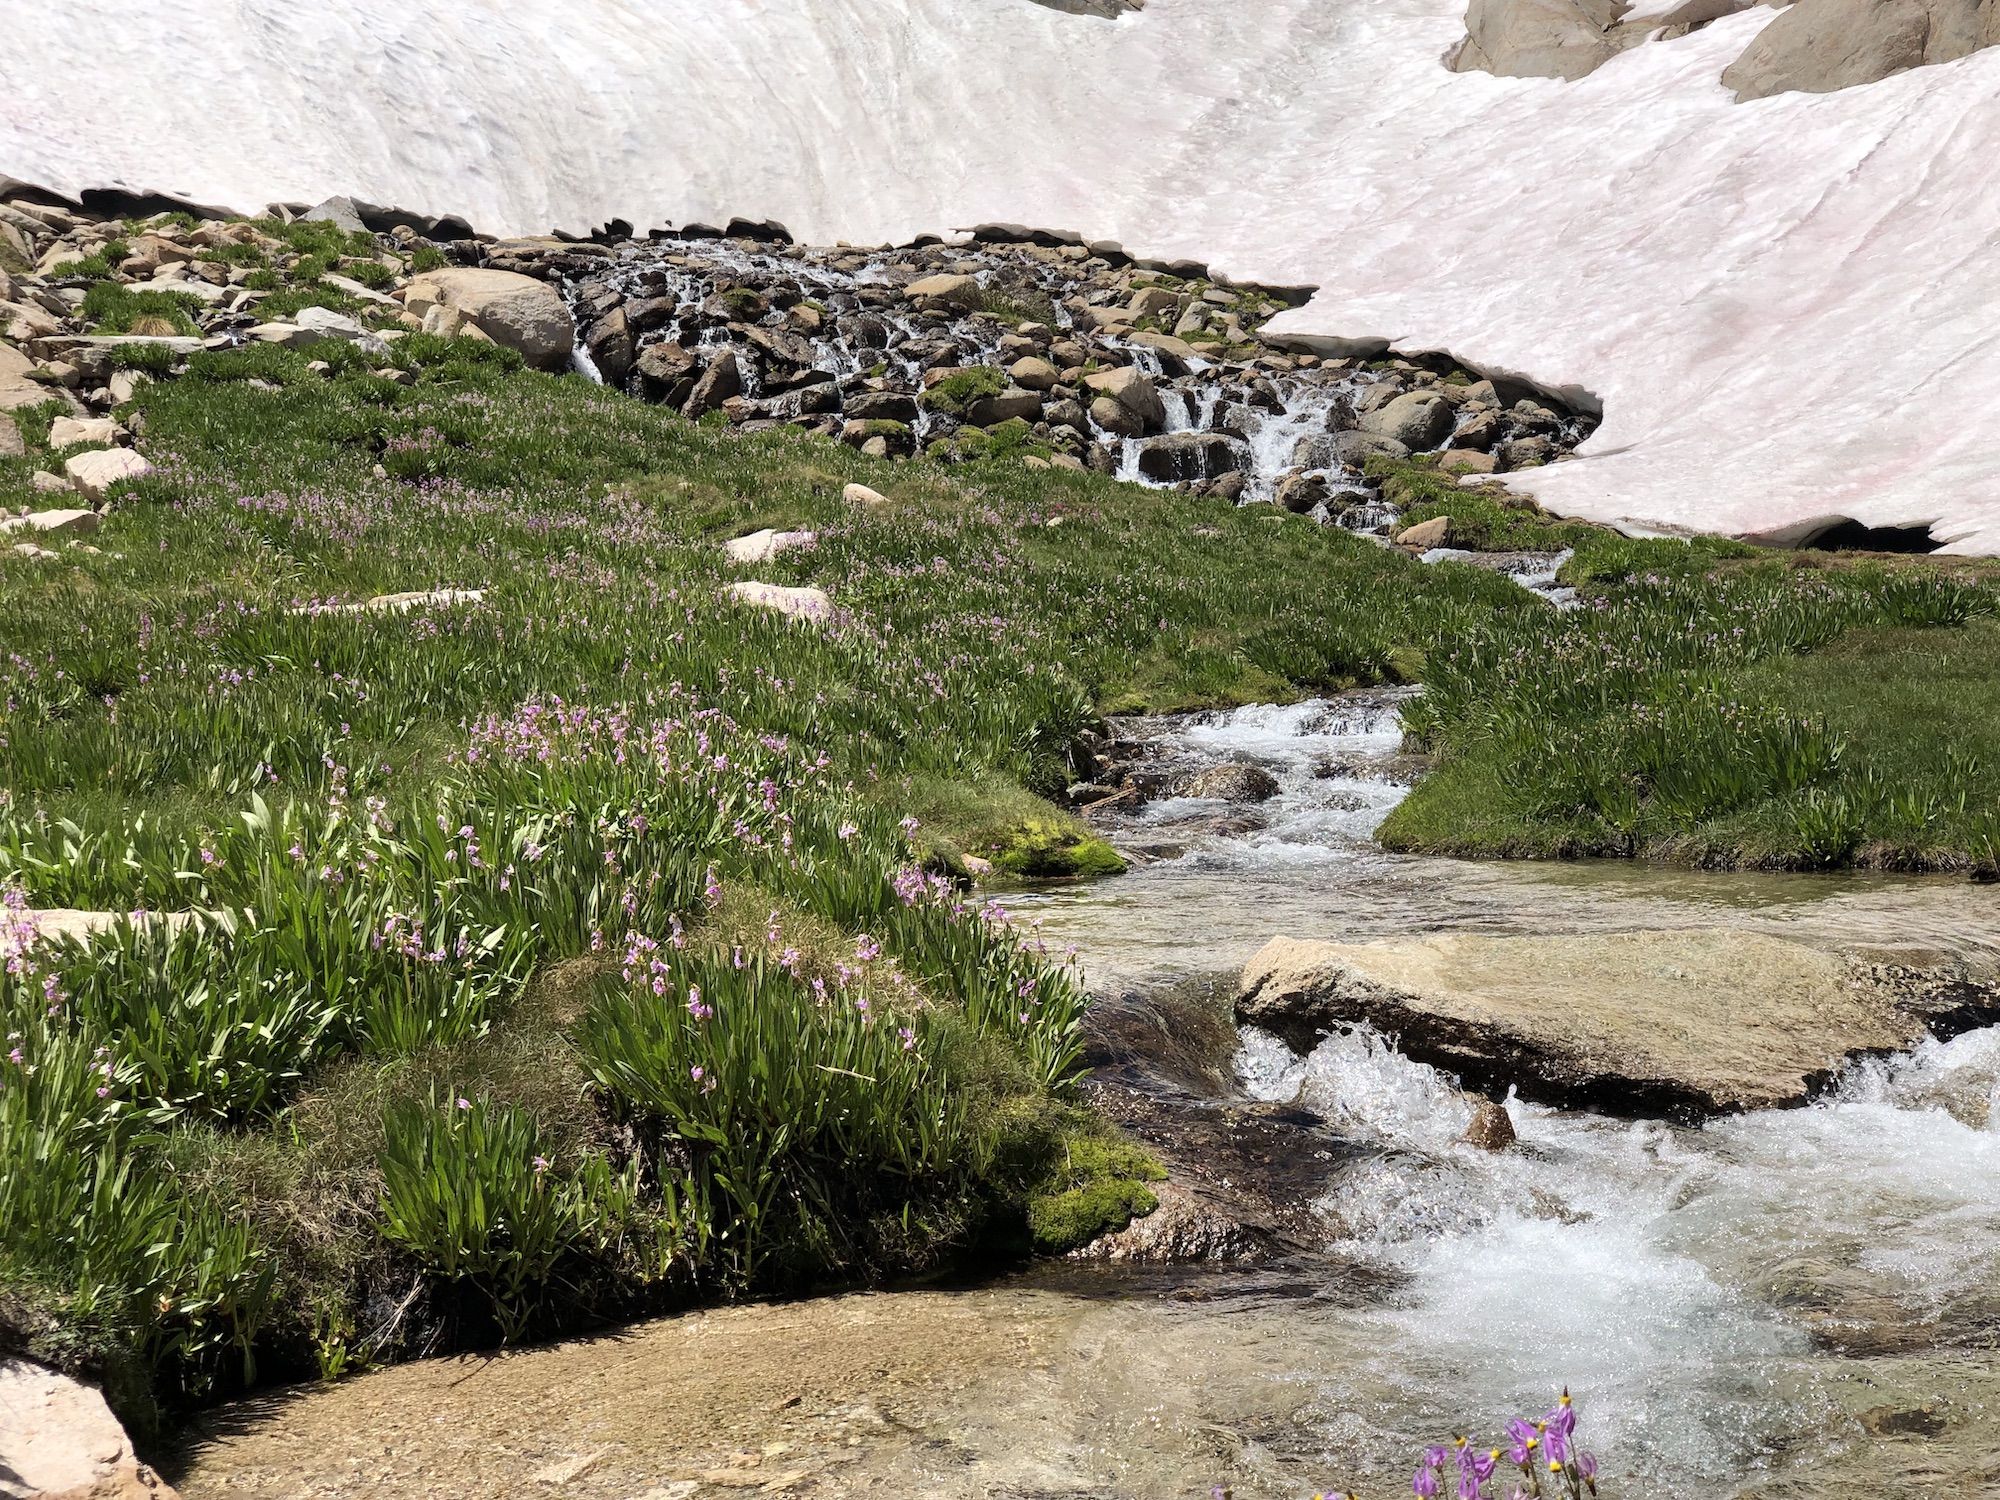 Pink flowers growing next to a stream flowing from a snow field.